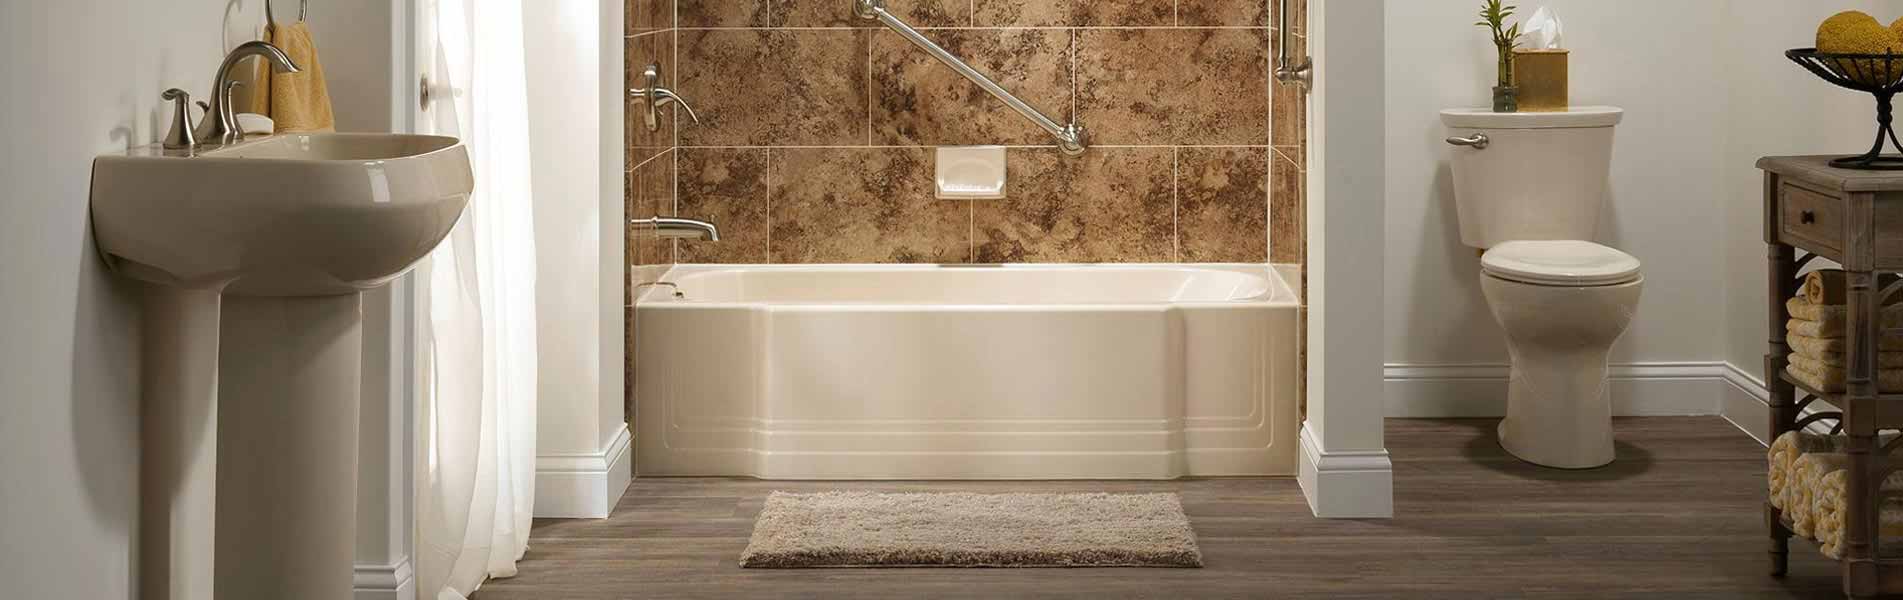 48 Timber Bathroom remodeling uniontown pa Flooring and Tiles Ideas